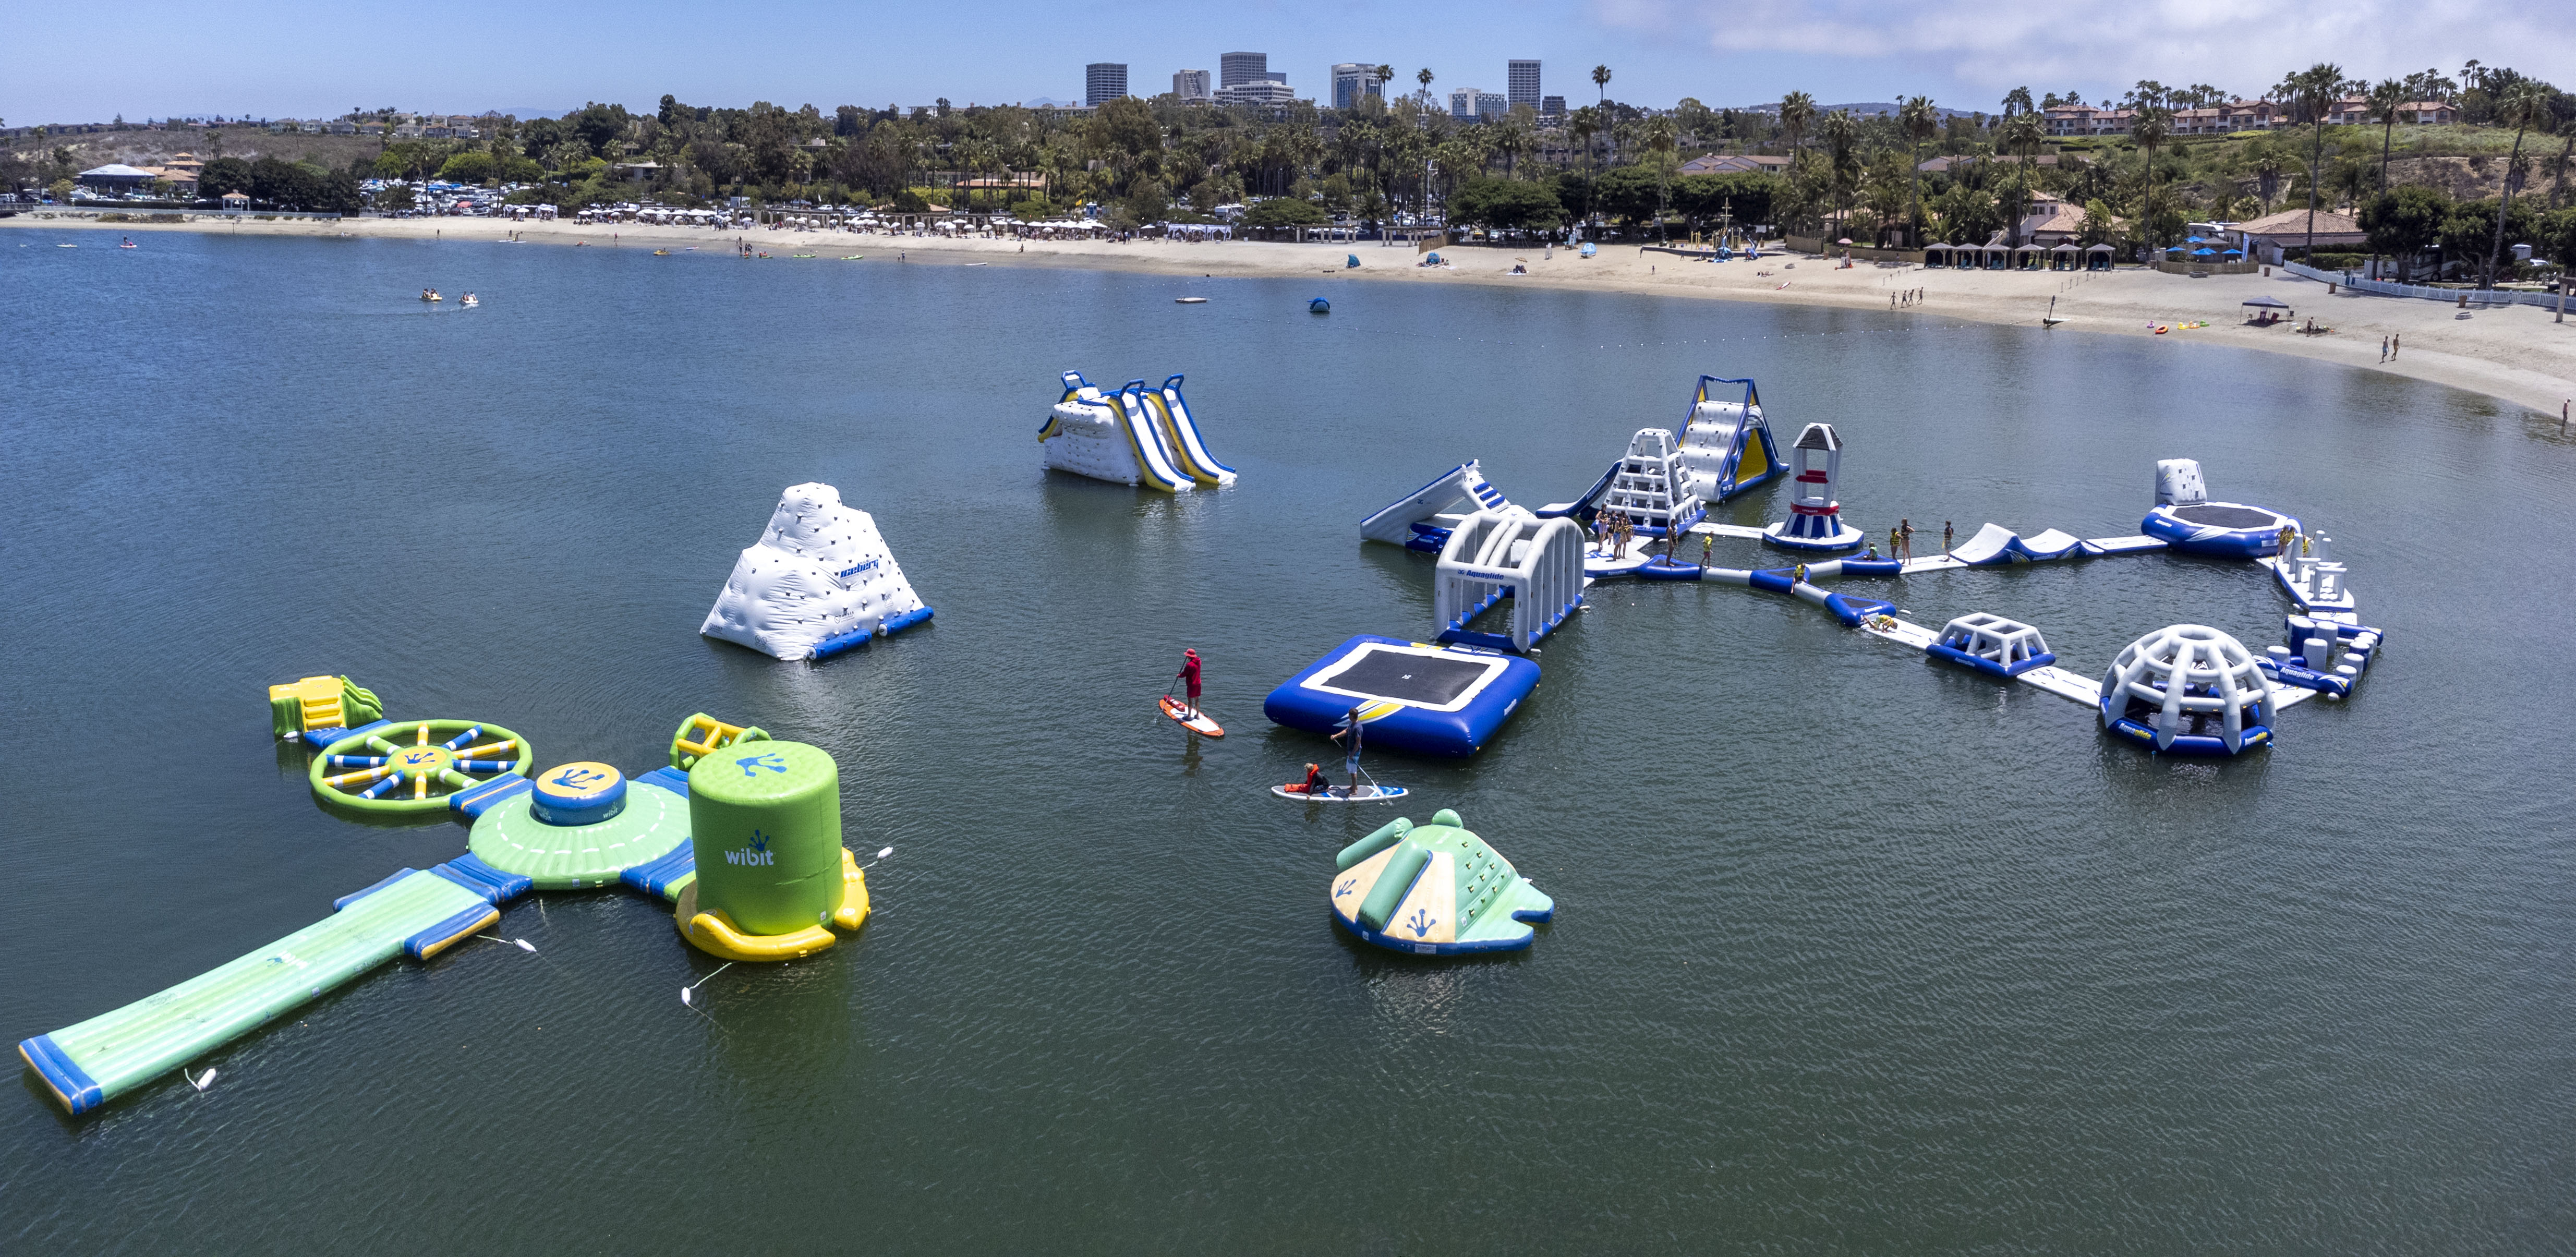 Aerial shot of floating play structures in a lagoon.